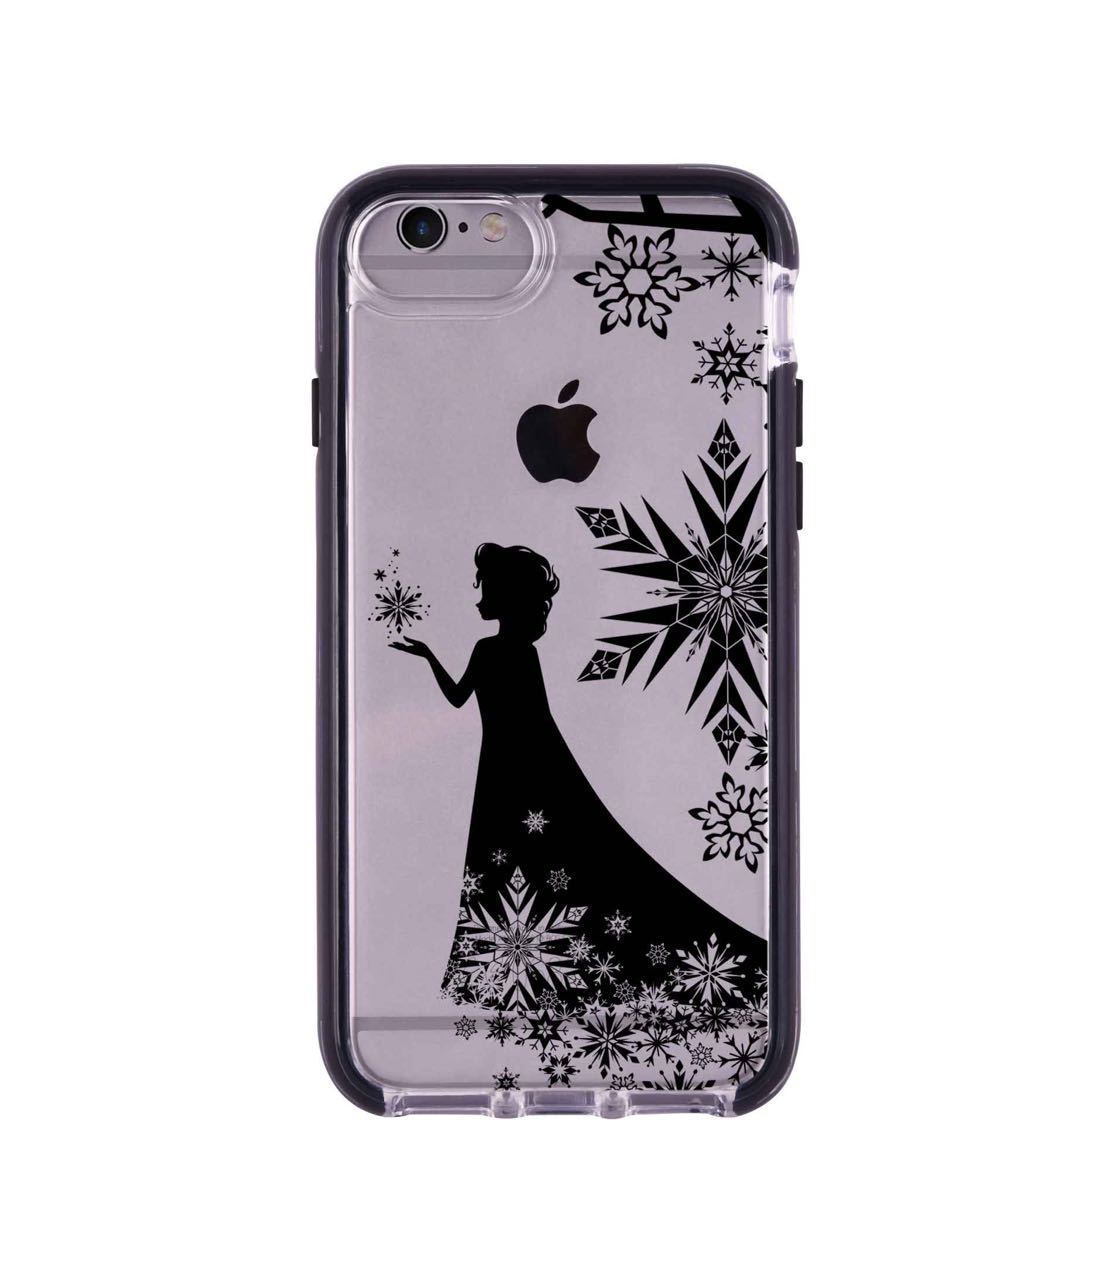 Elsa Silhouette - Extreme Phone Case for iPhone 6S Plus